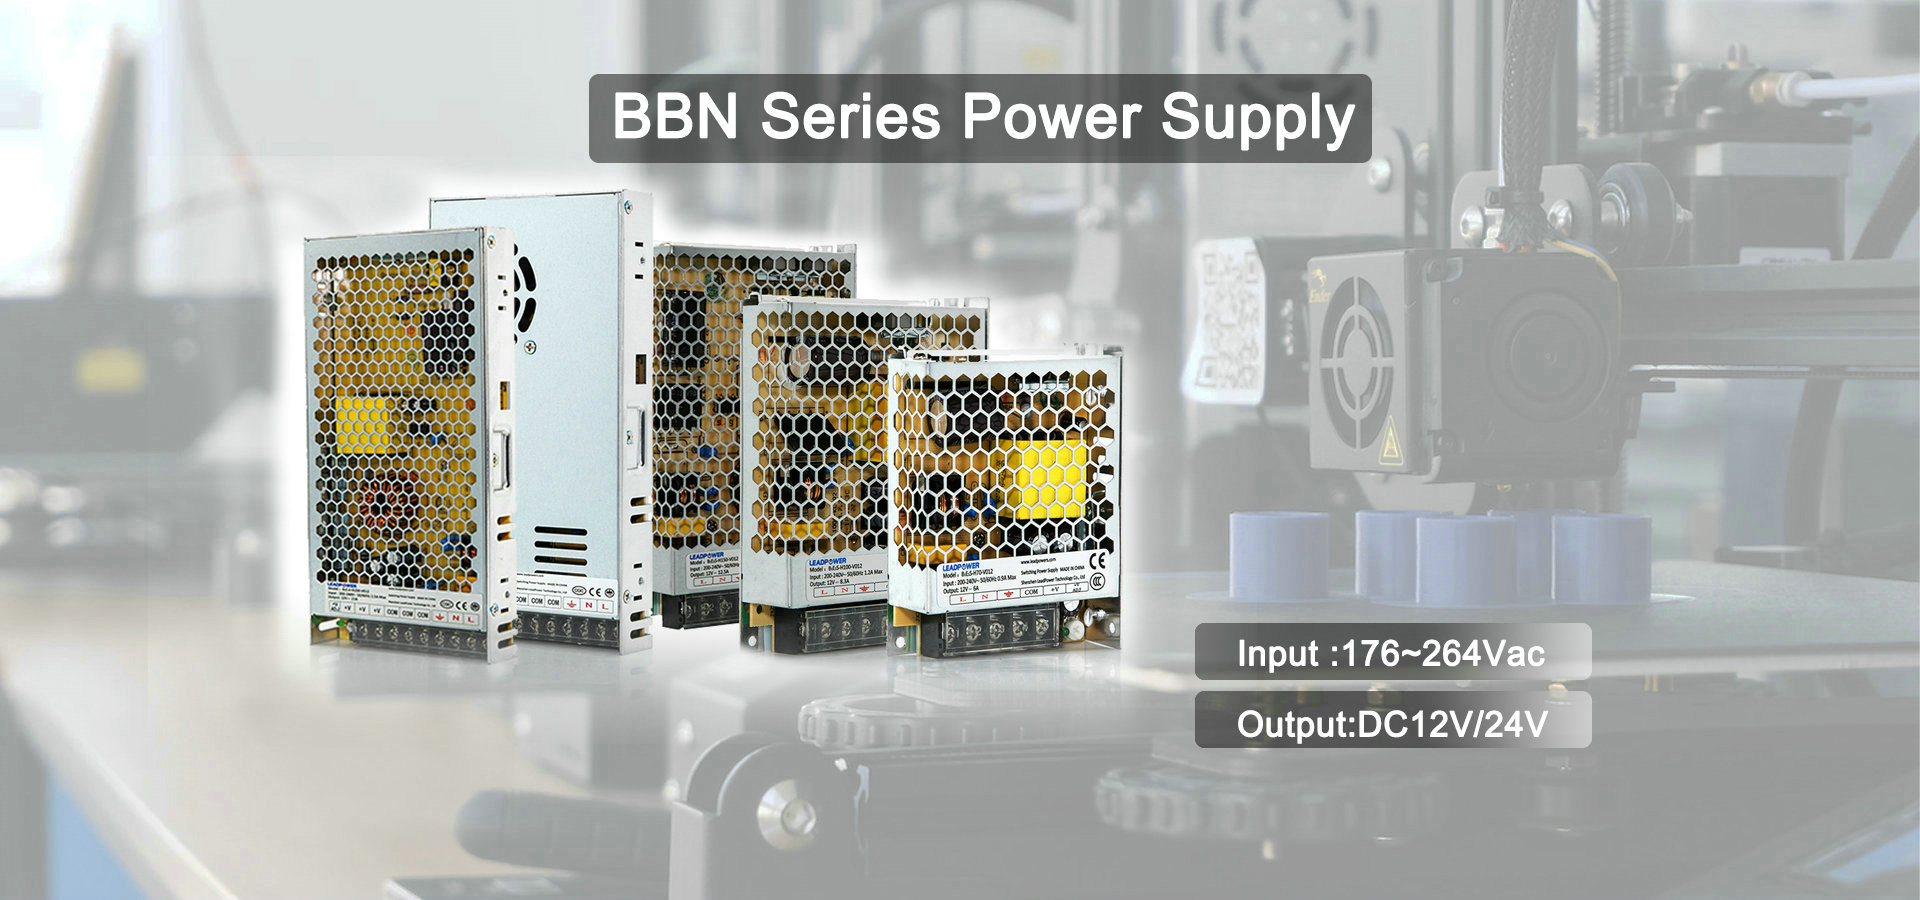 BBN Enclosed LED Power Supply